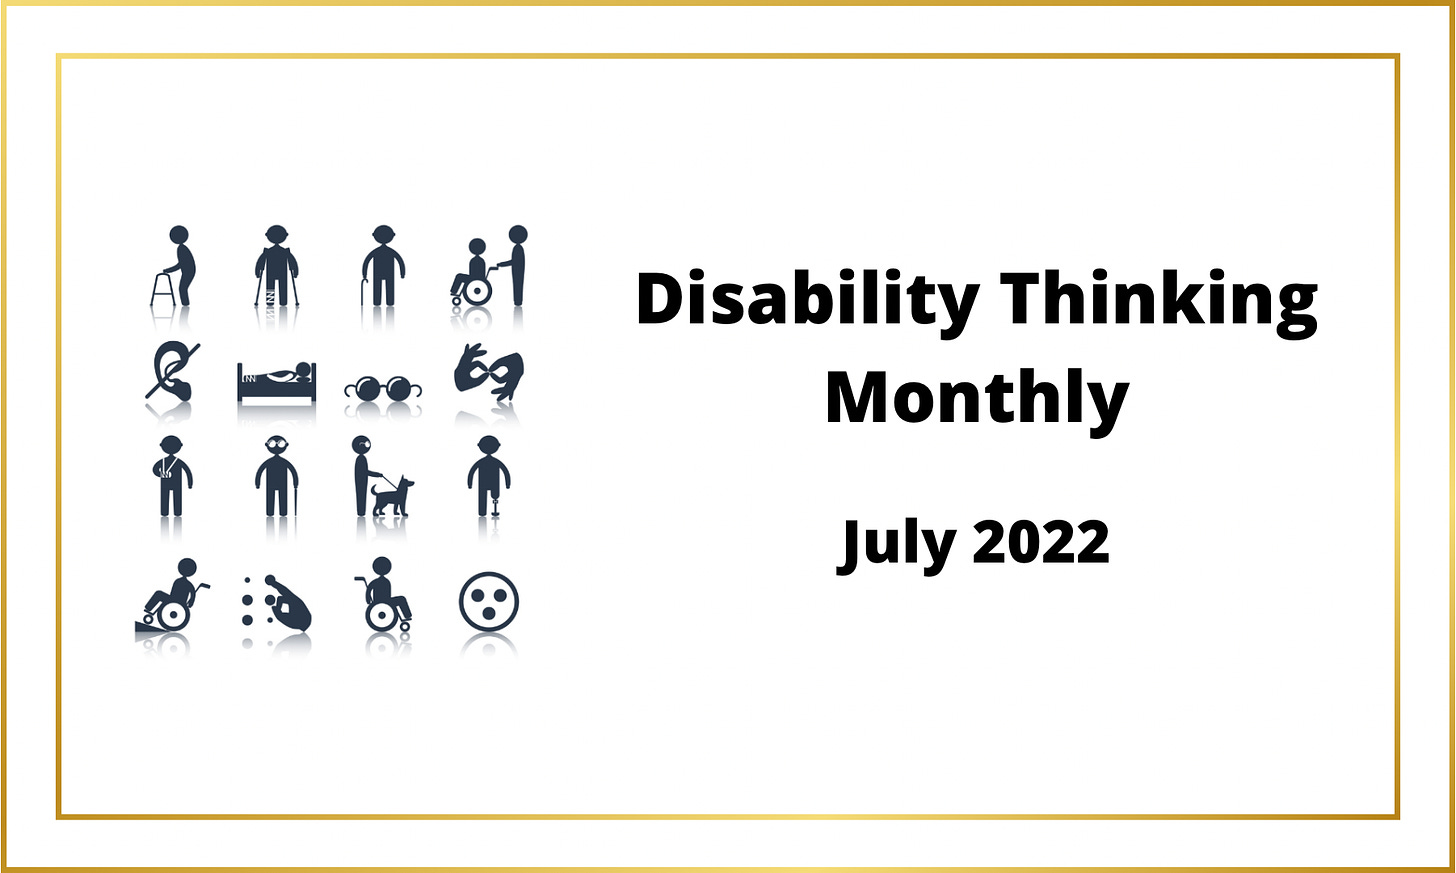 Disability Thinking Monthly - July 2022 - Square logo made up of 16 different black colored disability icons